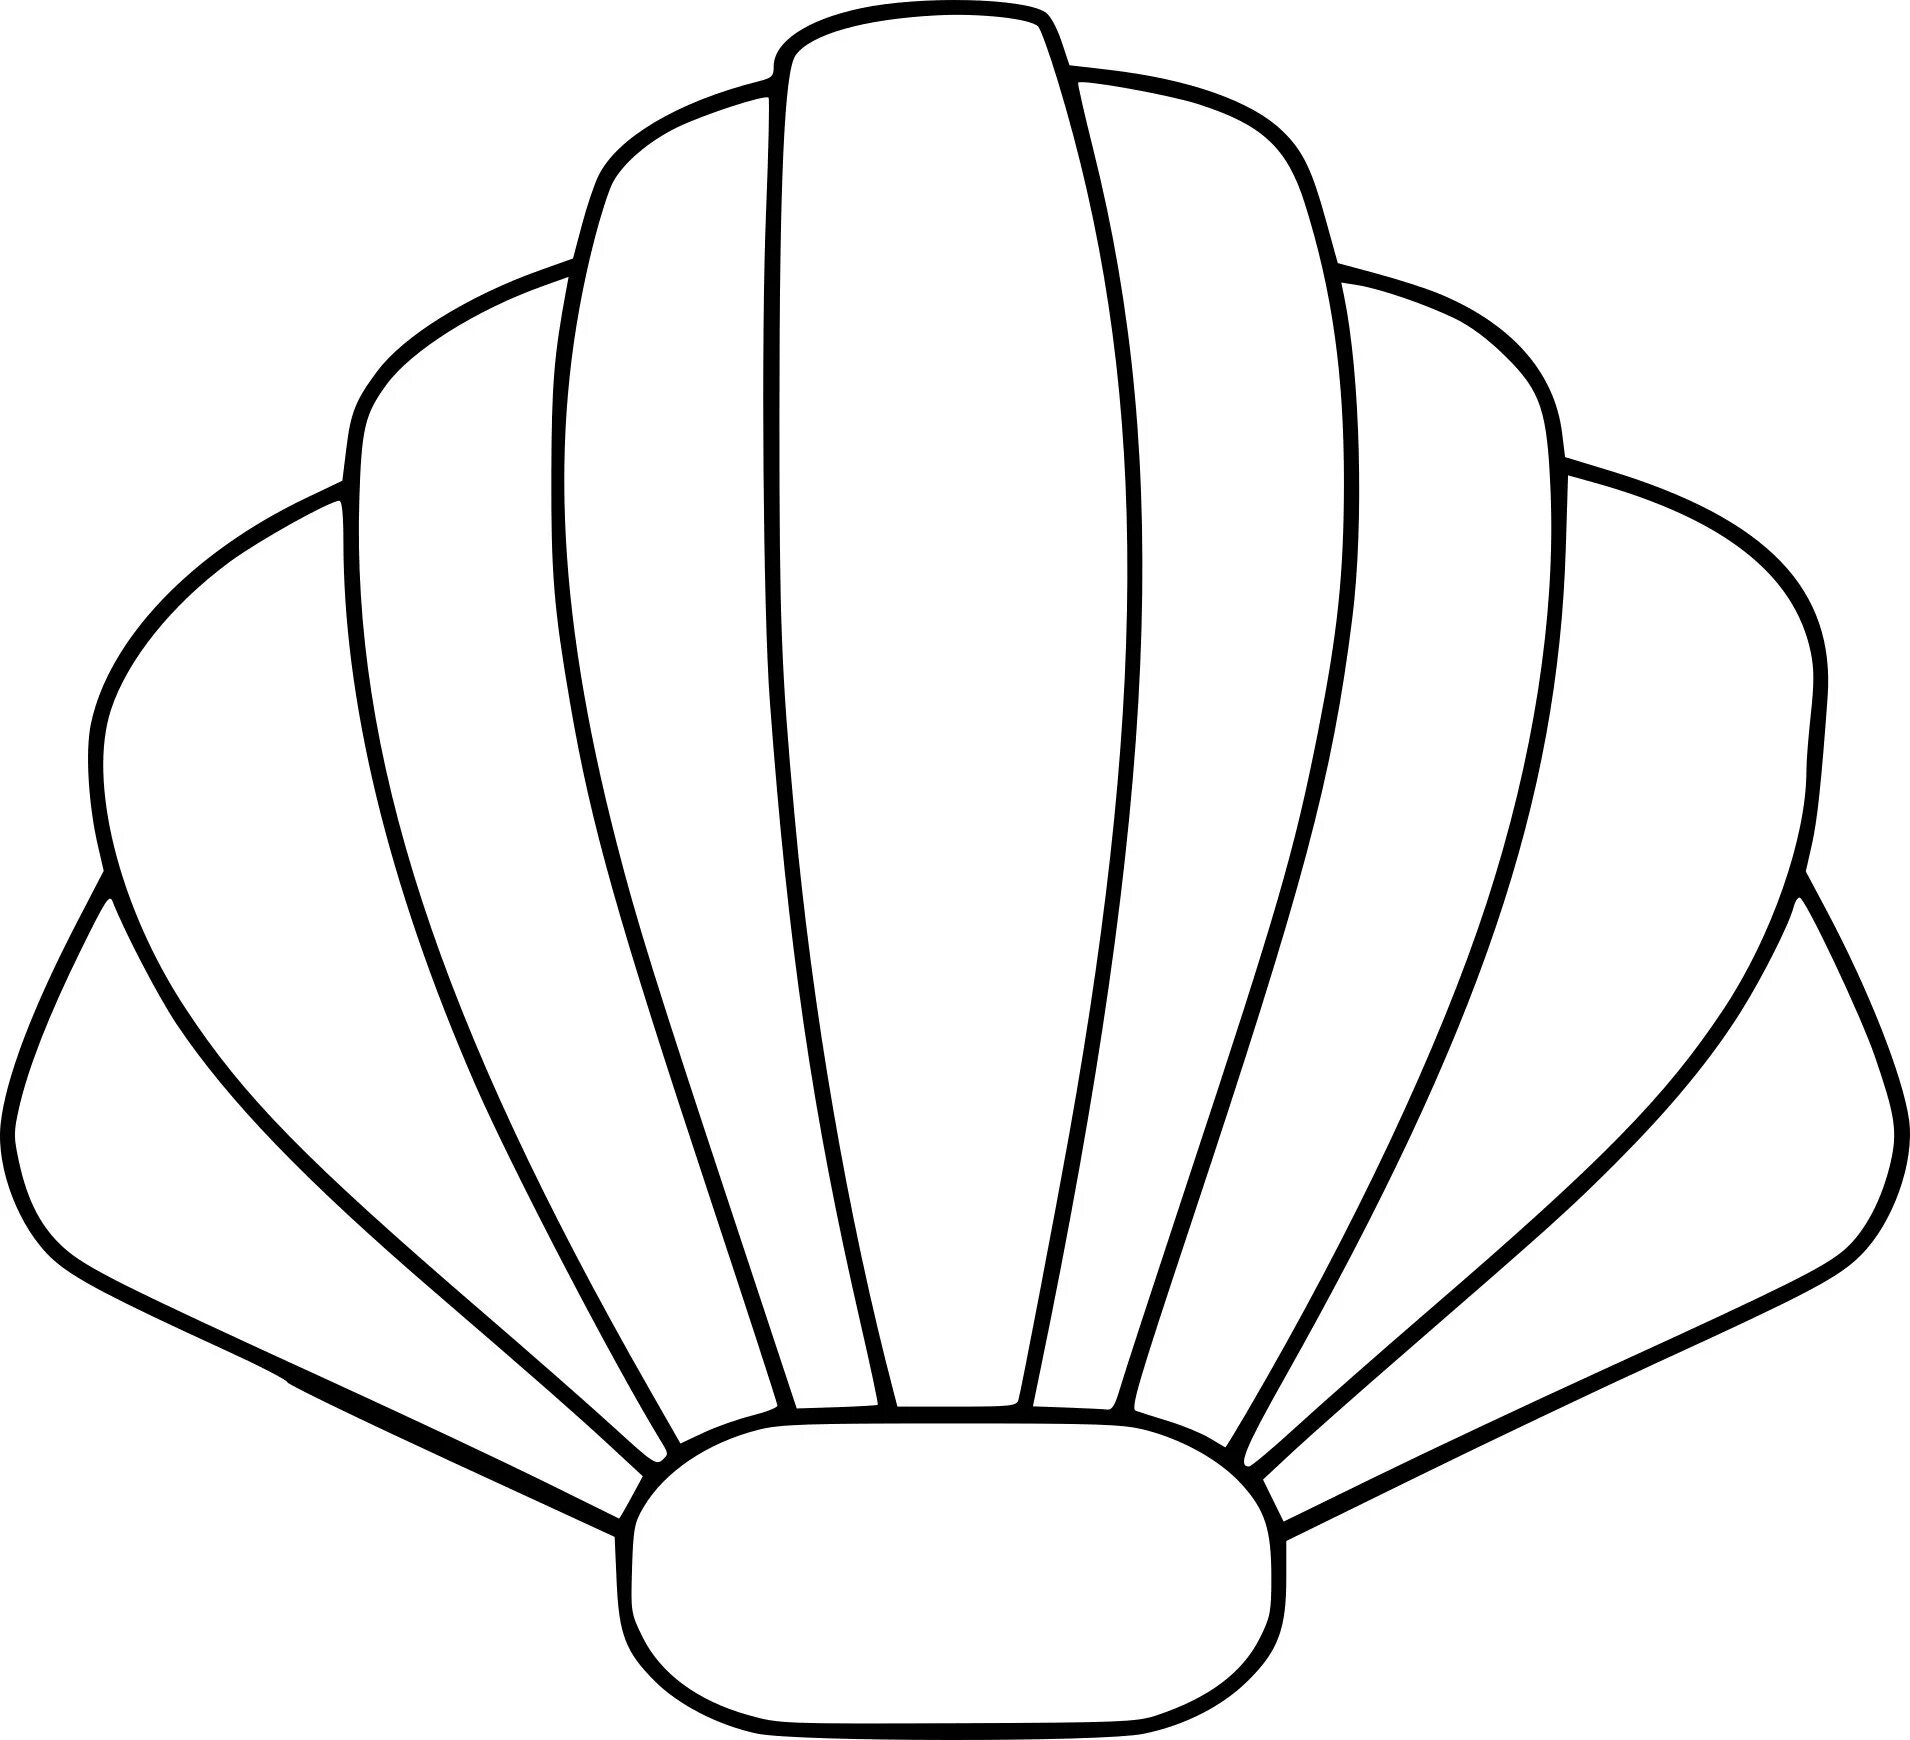 Animated seashells coloring page for kids